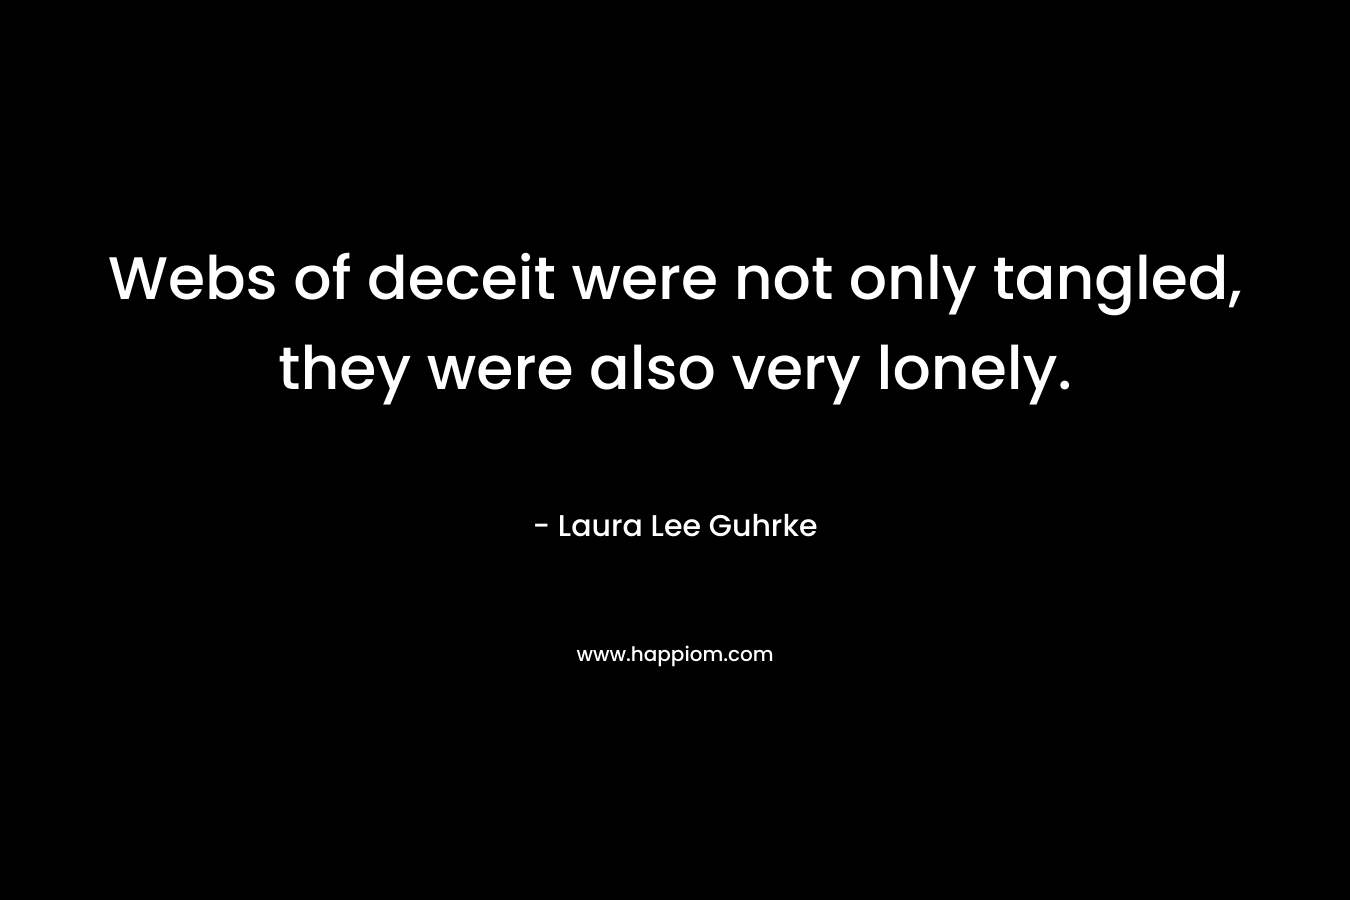 Webs of deceit were not only tangled, they were also very lonely. – Laura Lee Guhrke